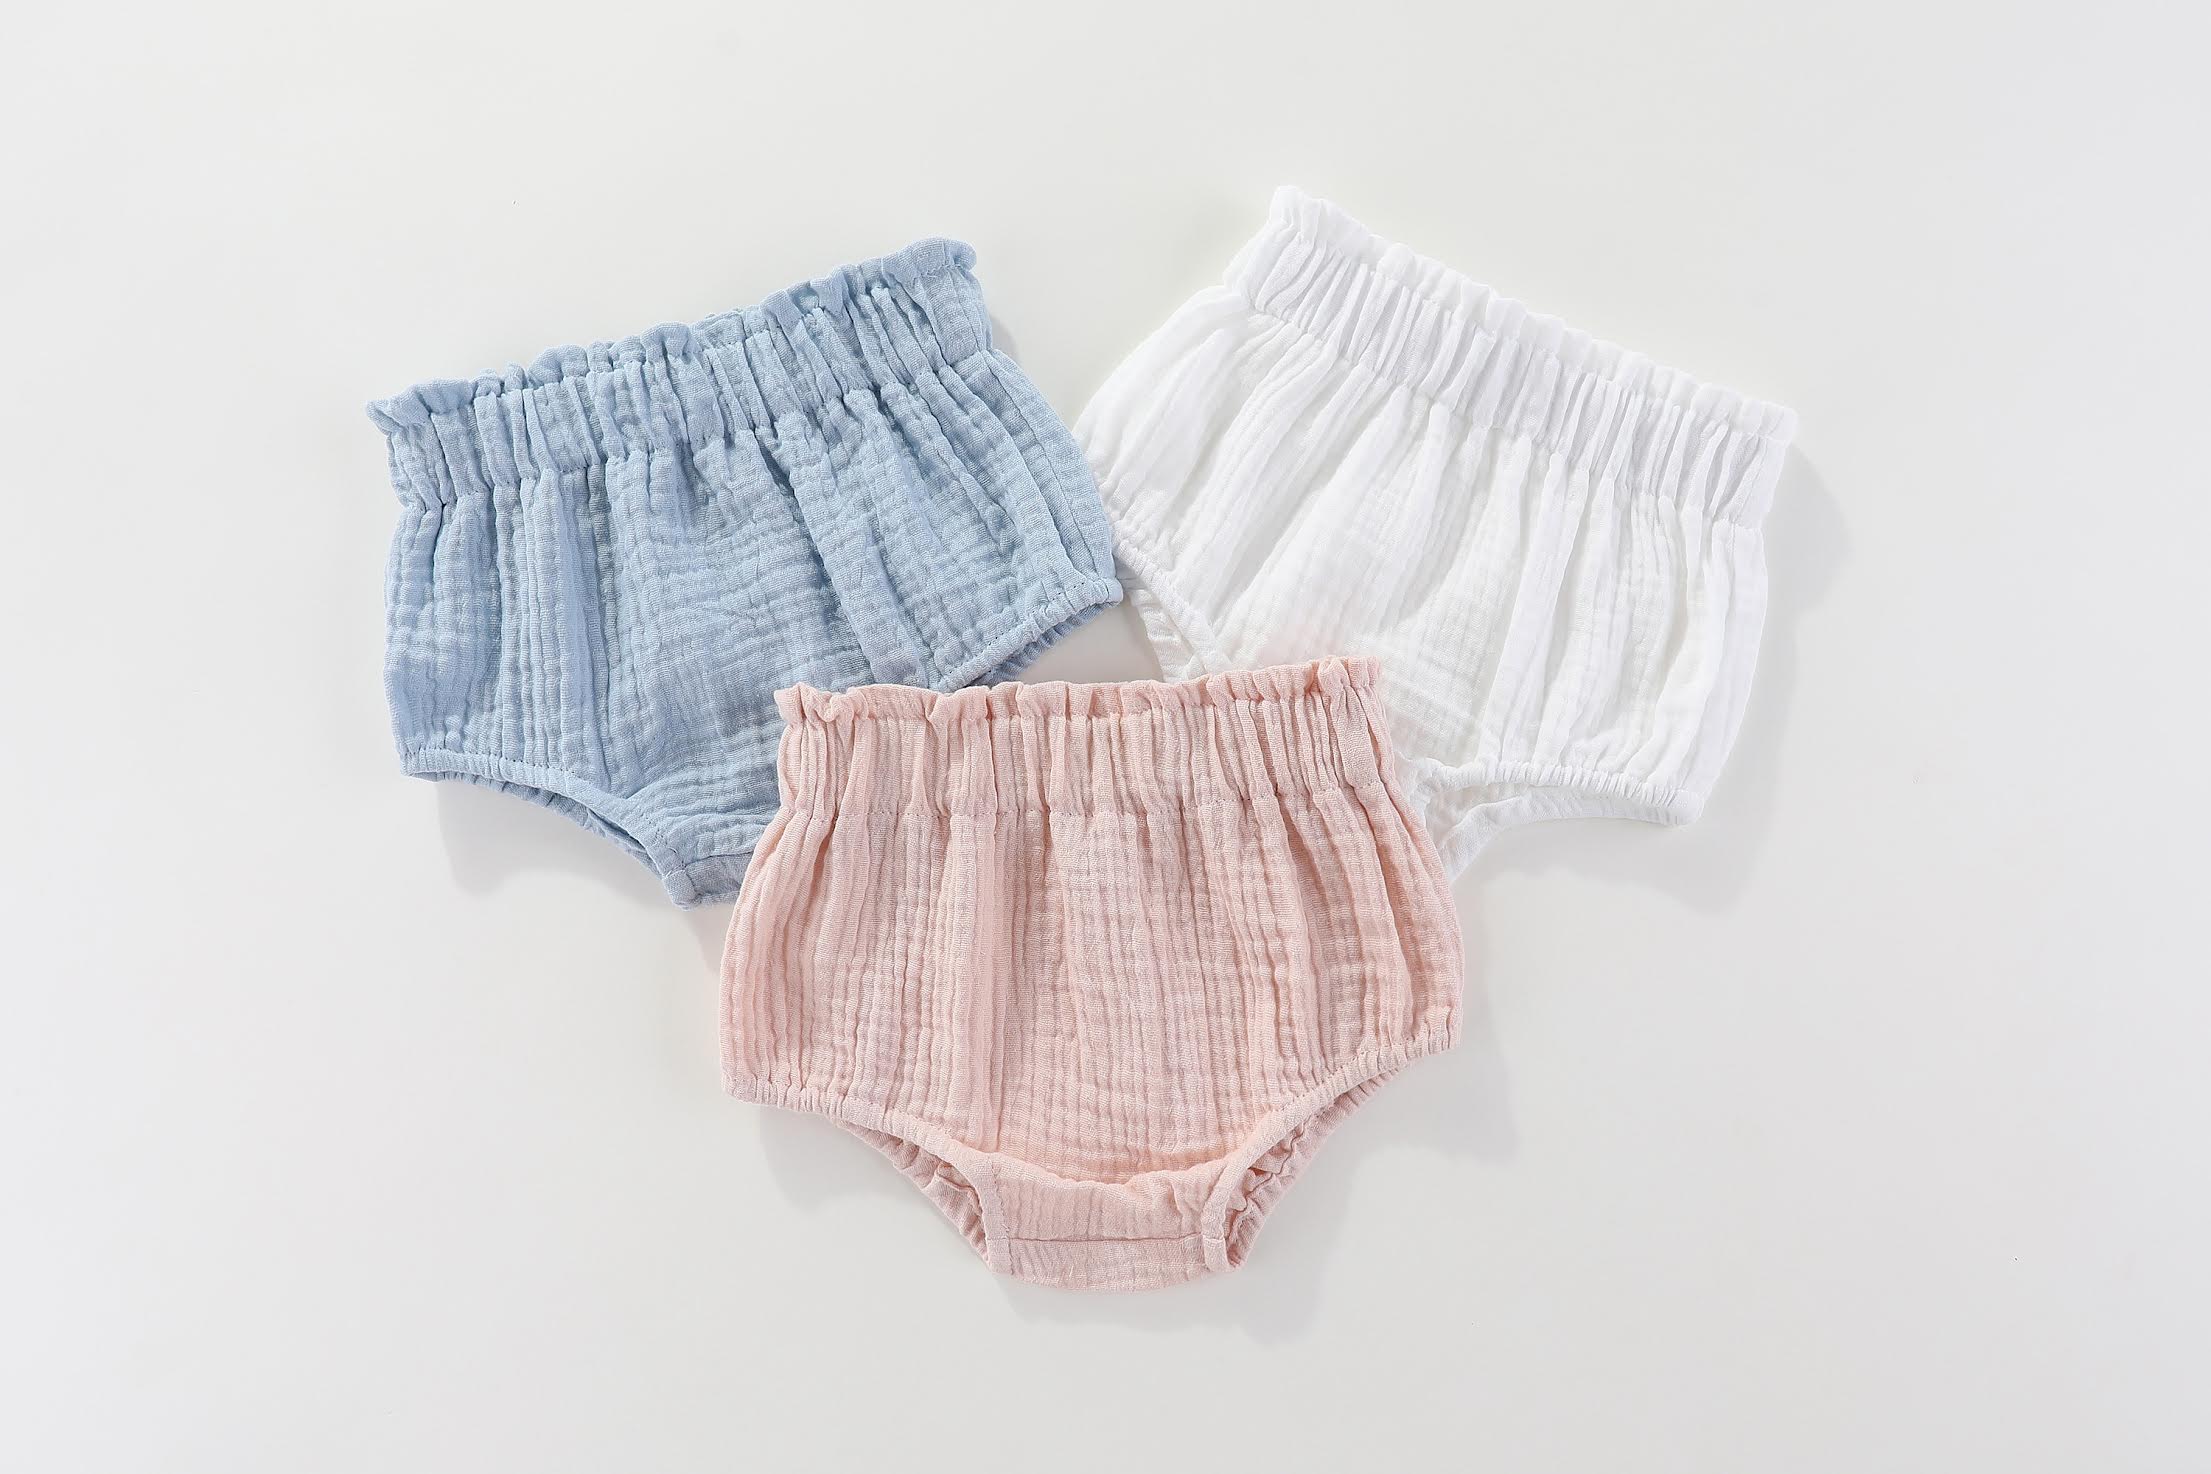 Gaia 100% Cotton bloomers: 0-3M, 3-6M, 6-12M, 1-2Y